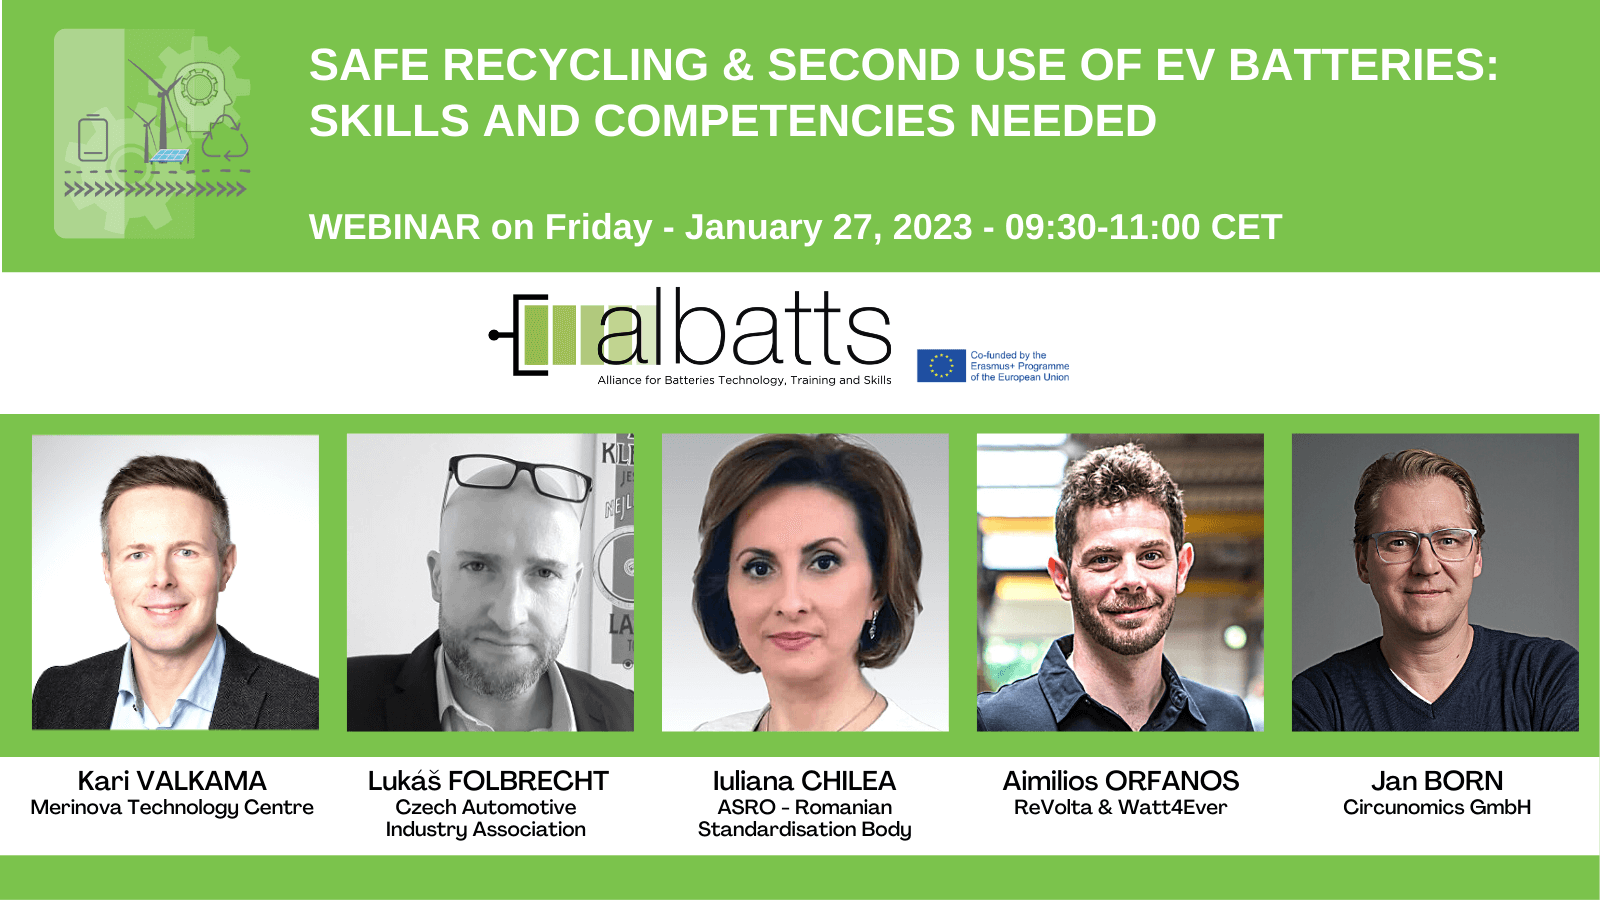 ALBATTS Webinar Safe Recycling & Second Use of EV Batteries: Skills and Competencies Needed